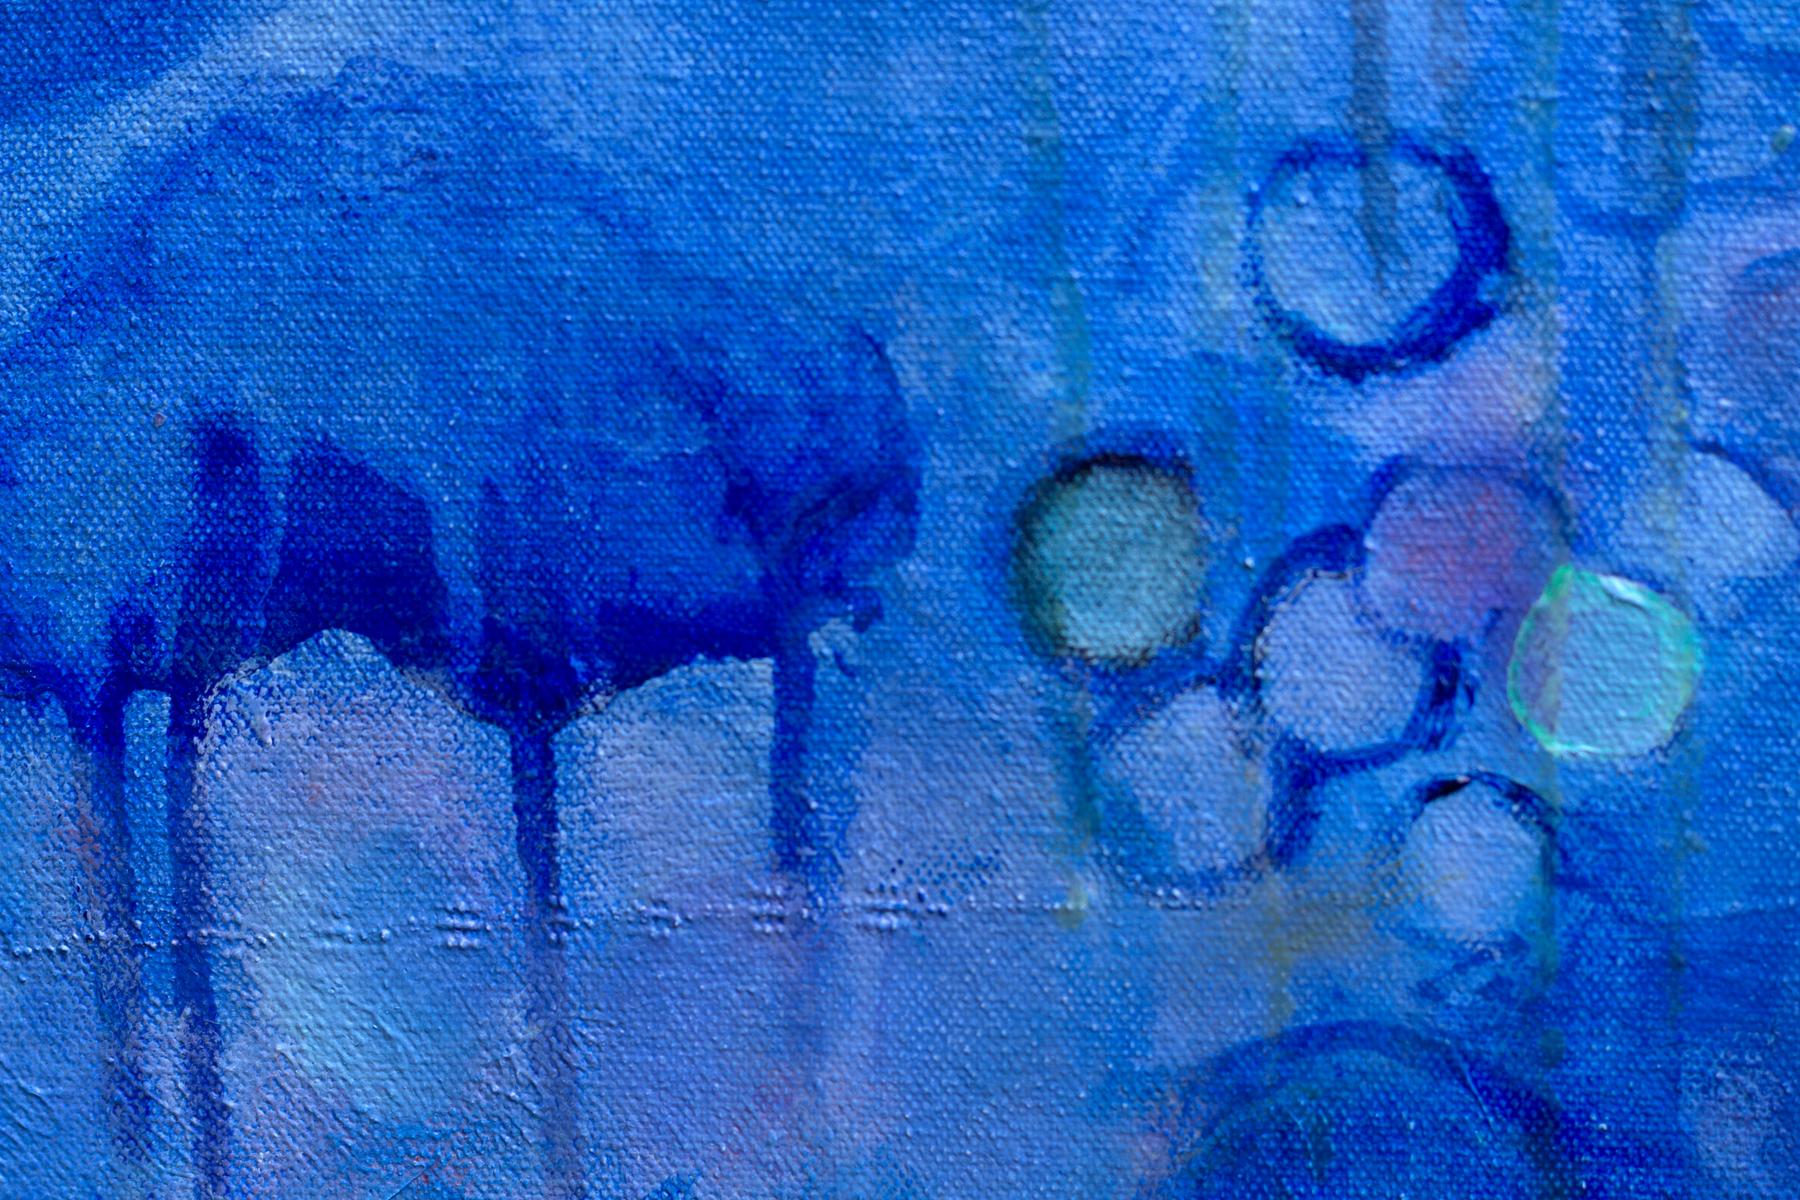 abstract painting in blue